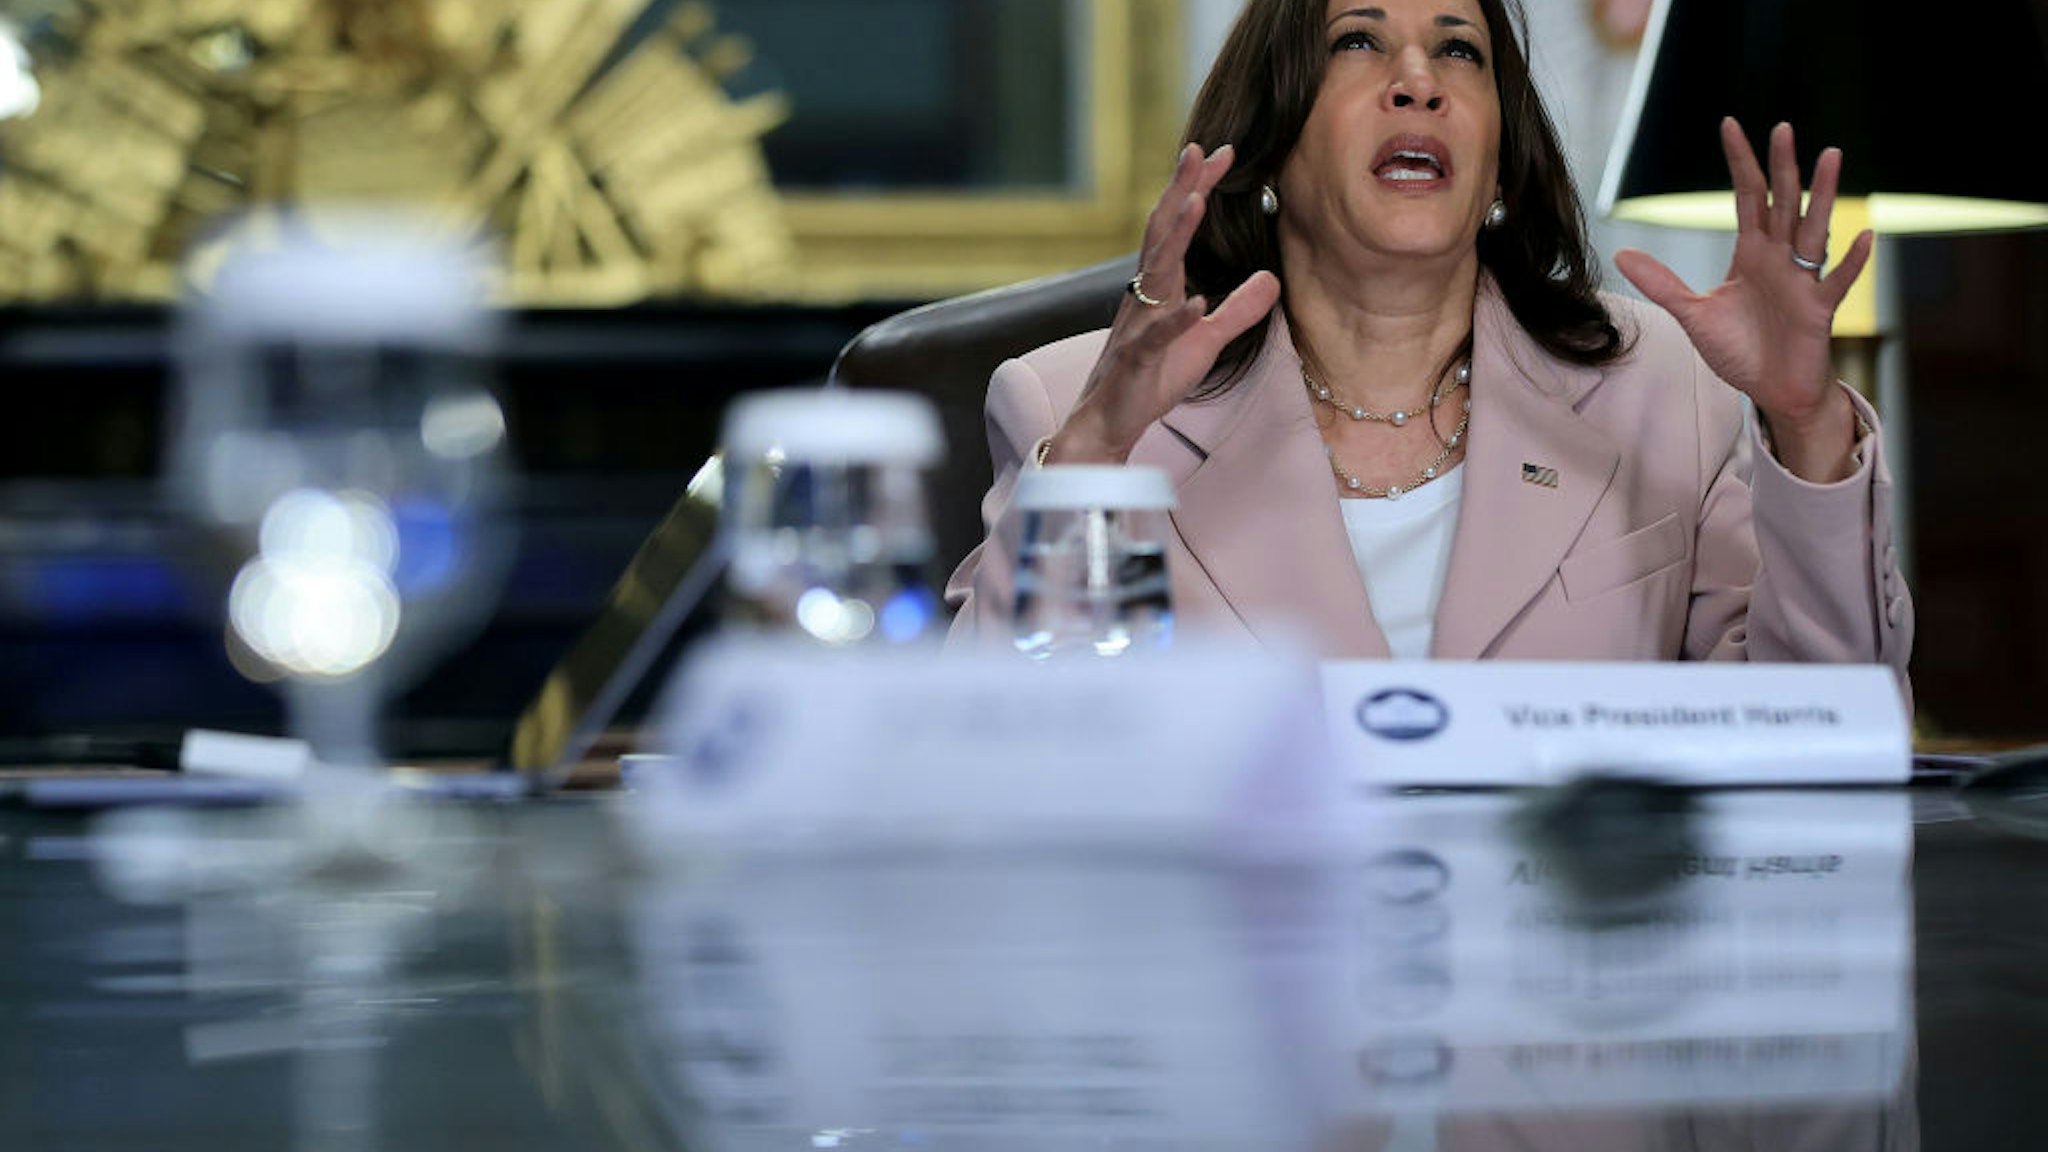 U.S. Vice President Kamala Harris delivers remarks at the start of a roundtable discussion on voting rights for people living with disabilities in her ceremonial office in the Eisenhower Executive Office Building on July 14, 2021 in Washington, DC.